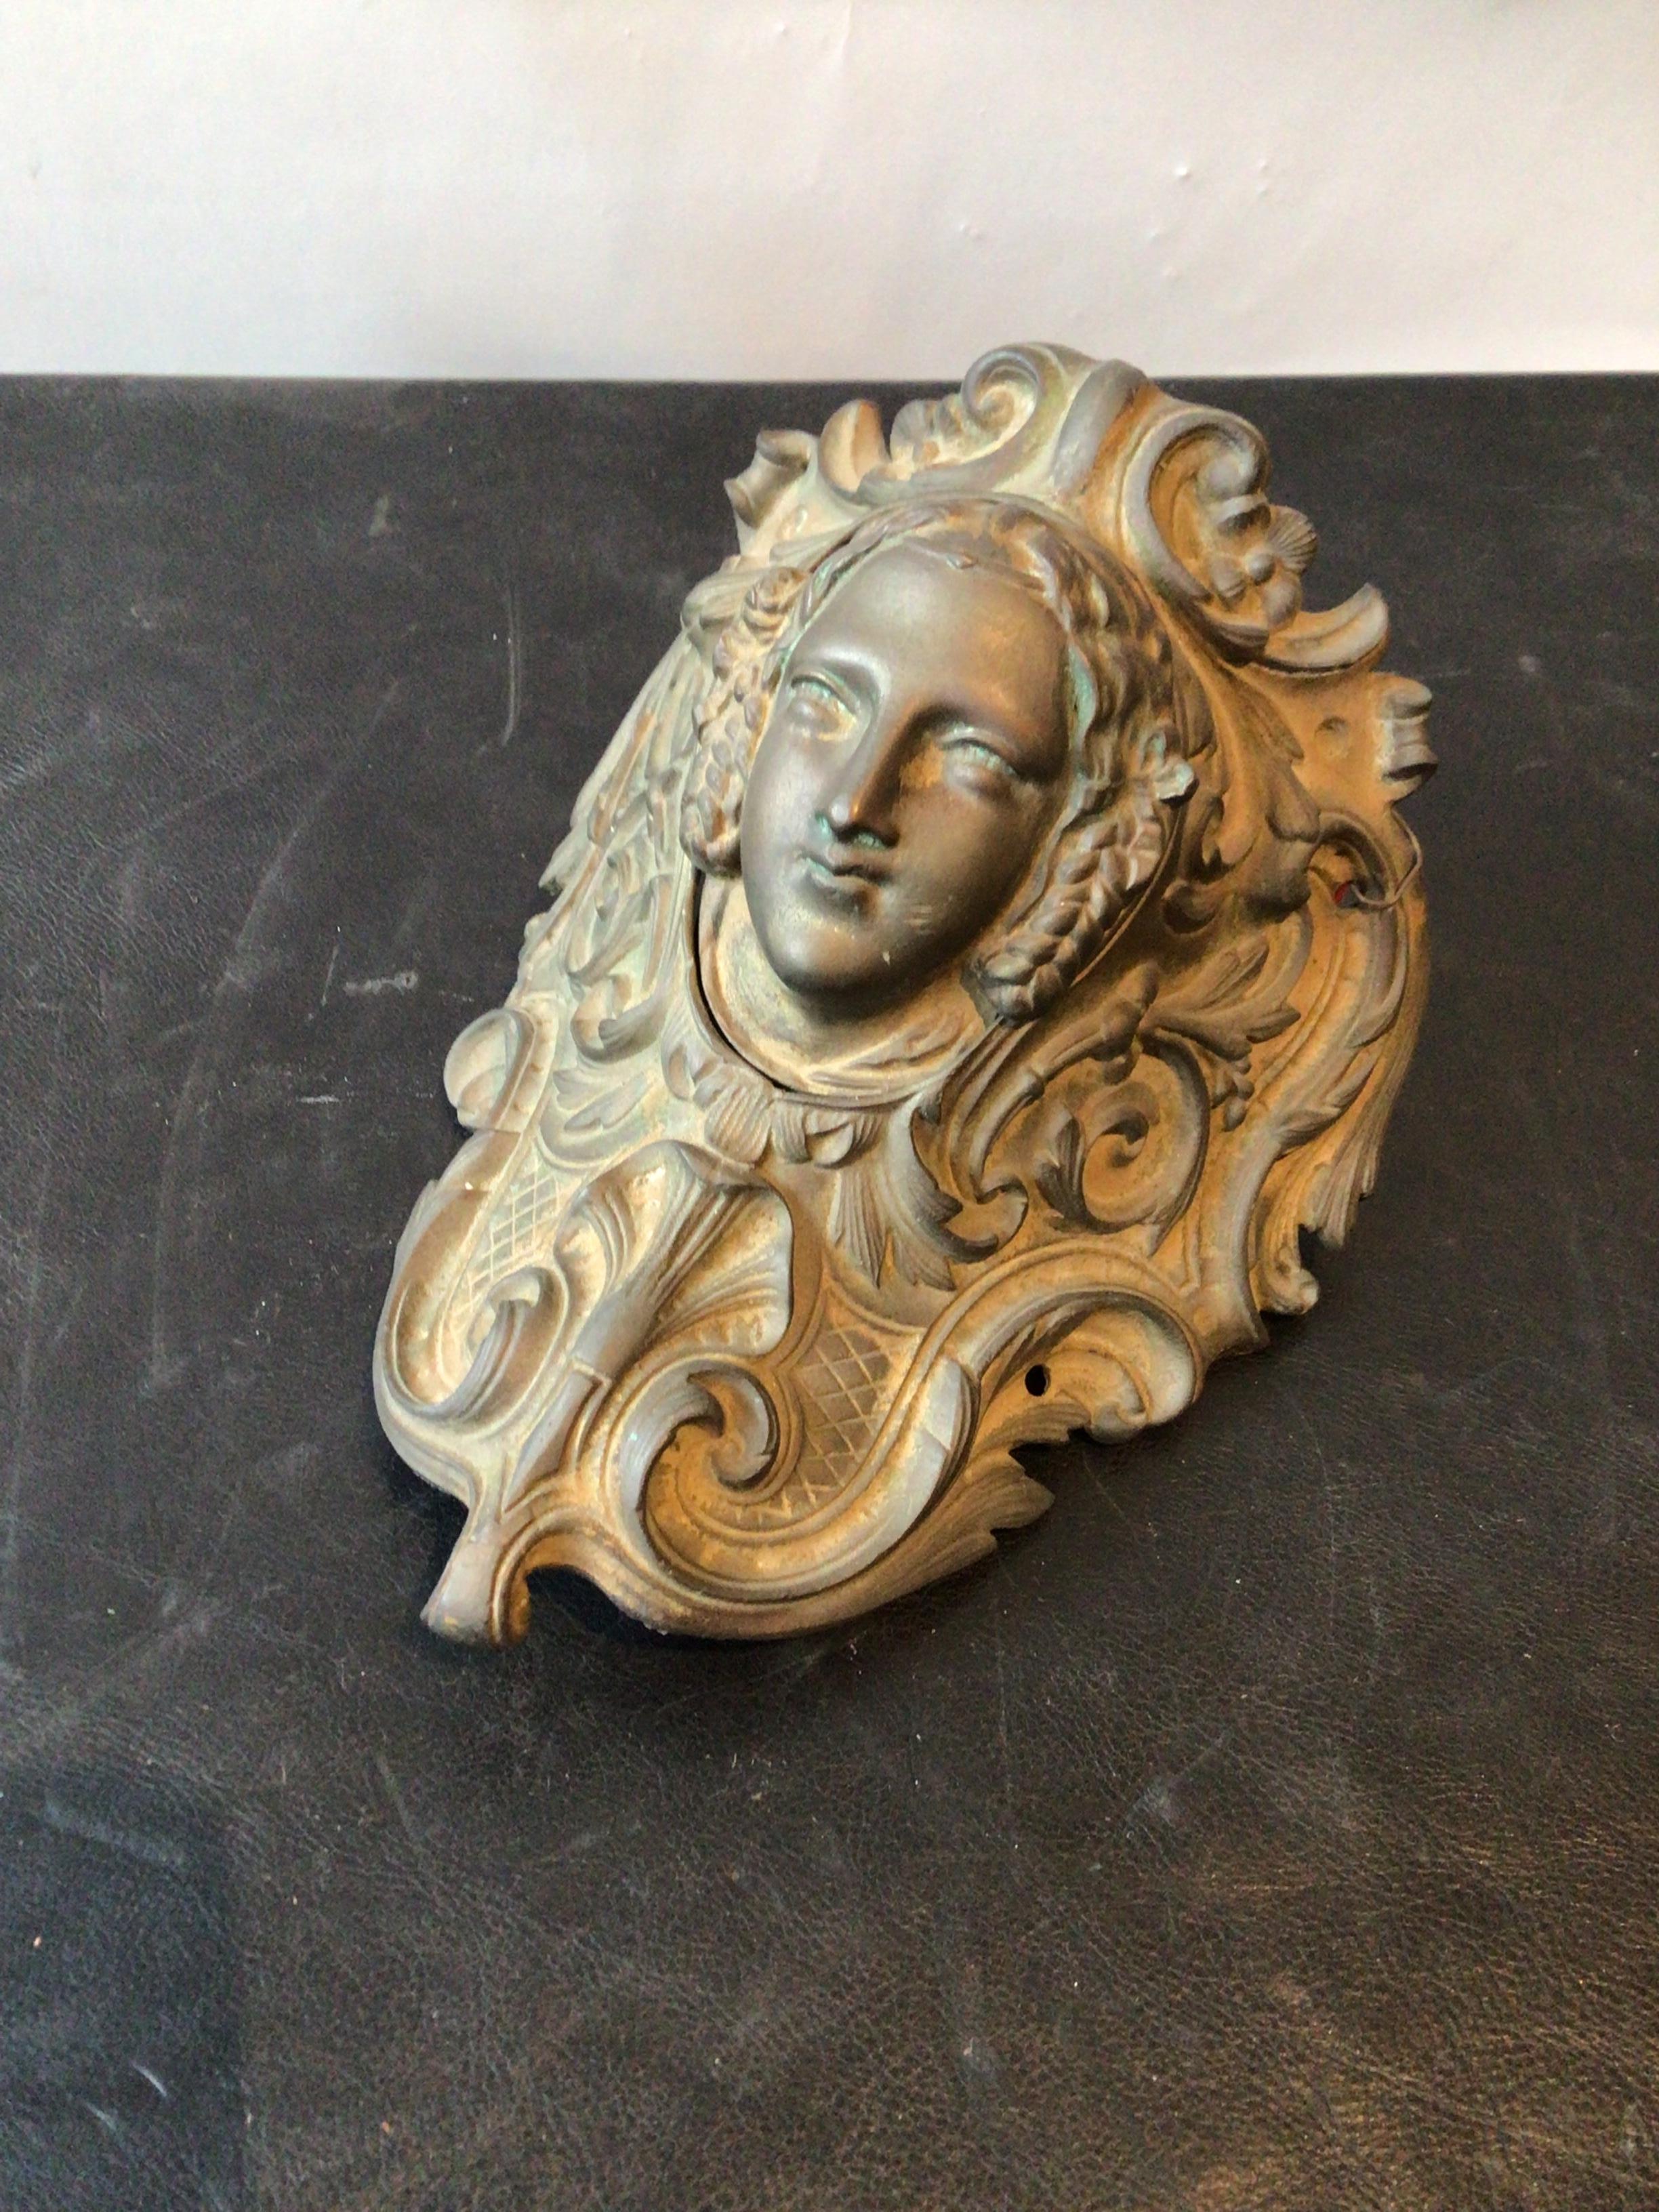 1880s decorative bronze piece. Woman’s head flips up. I’m not sure what this originally was. When I bought it, it was hung in the library of a Southampton, NY estate.